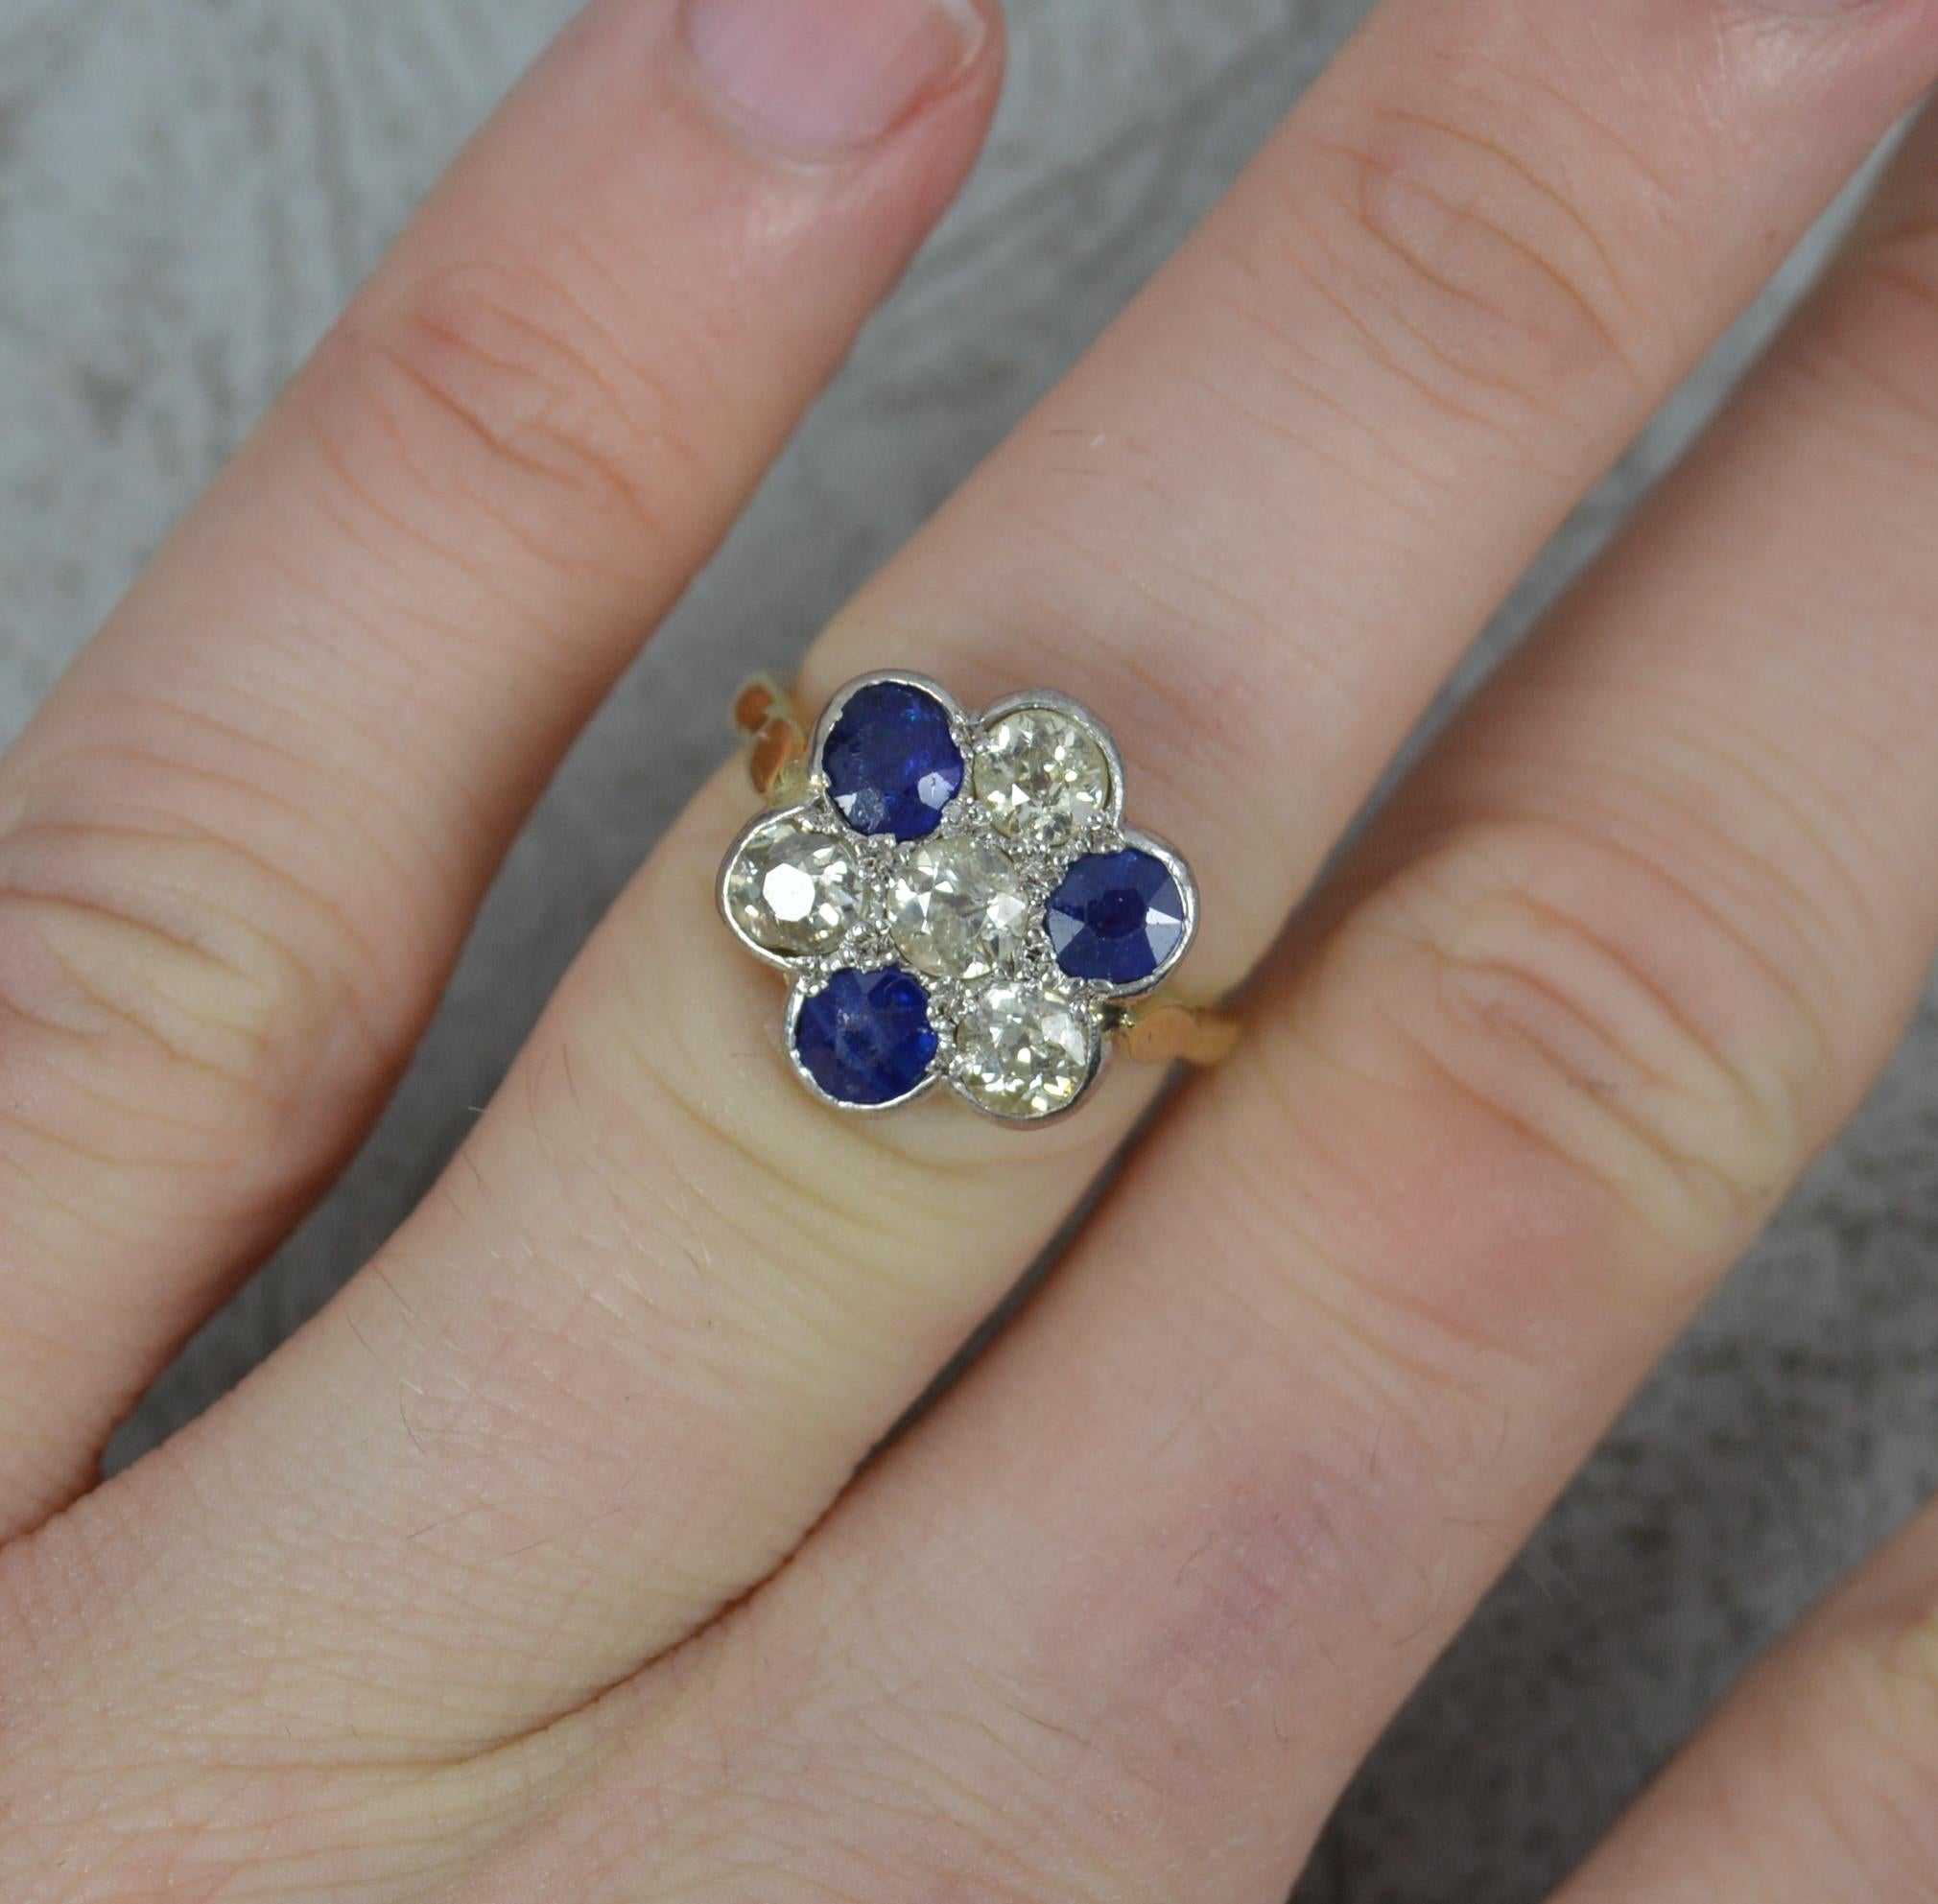 A beautiful late Victorian or Edwardian period cluster ring.
Solid 18 carat yellow gold shank with platinum head setting.
Three natural blue sapphires and four natural old cut diamonds. Total diamond carat weight of 1.00 carats.
13.8mm x 14.3mm